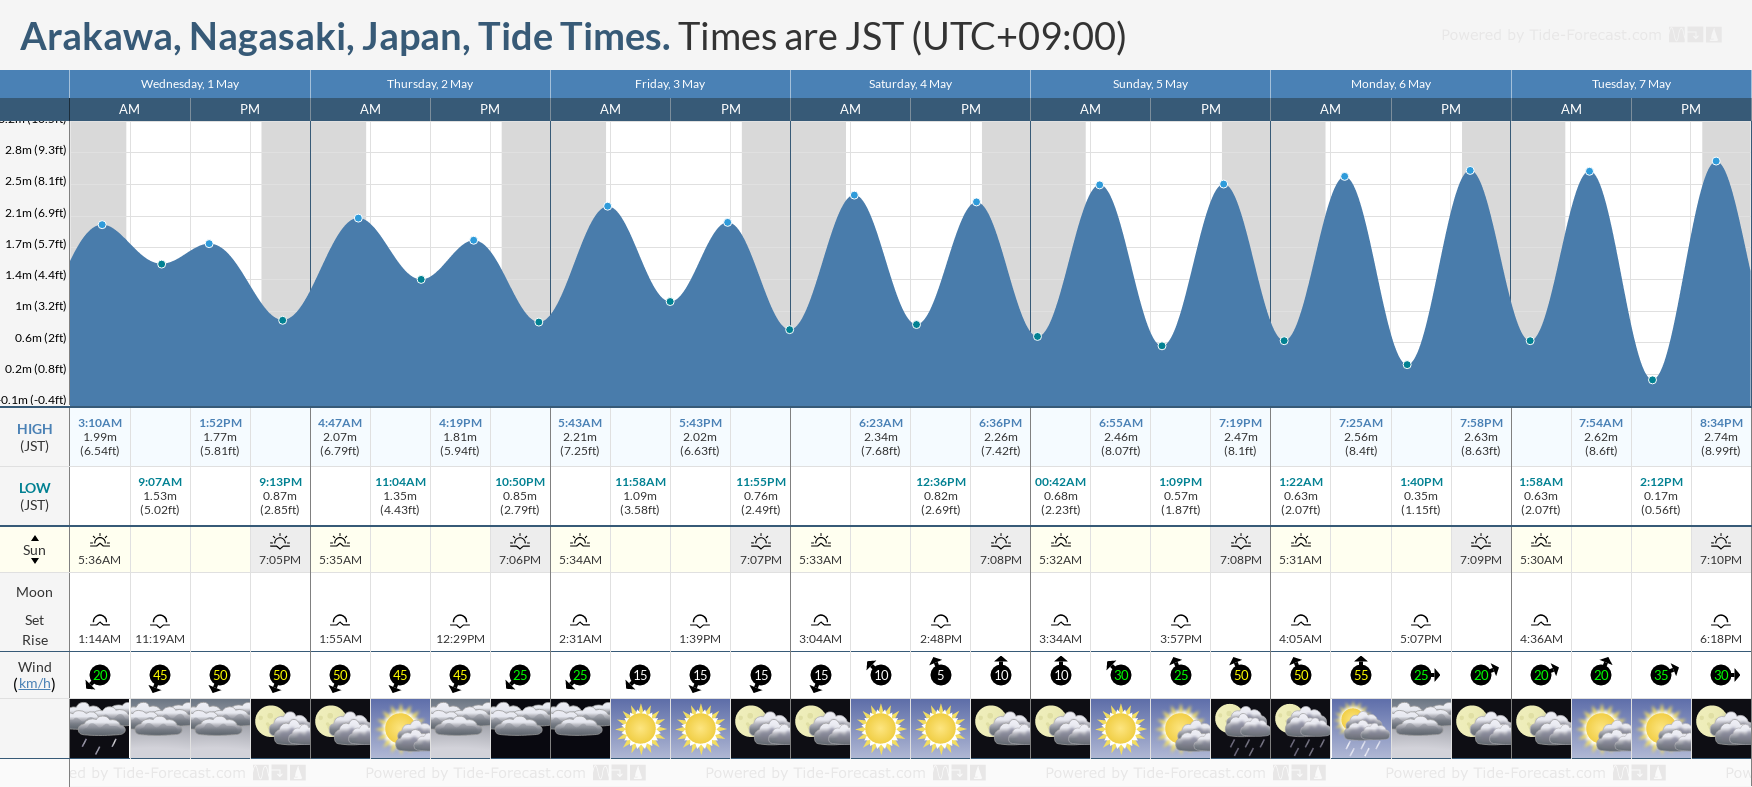 Arakawa, Nagasaki, Japan Tide Chart including high and low tide tide times for the next 7 days